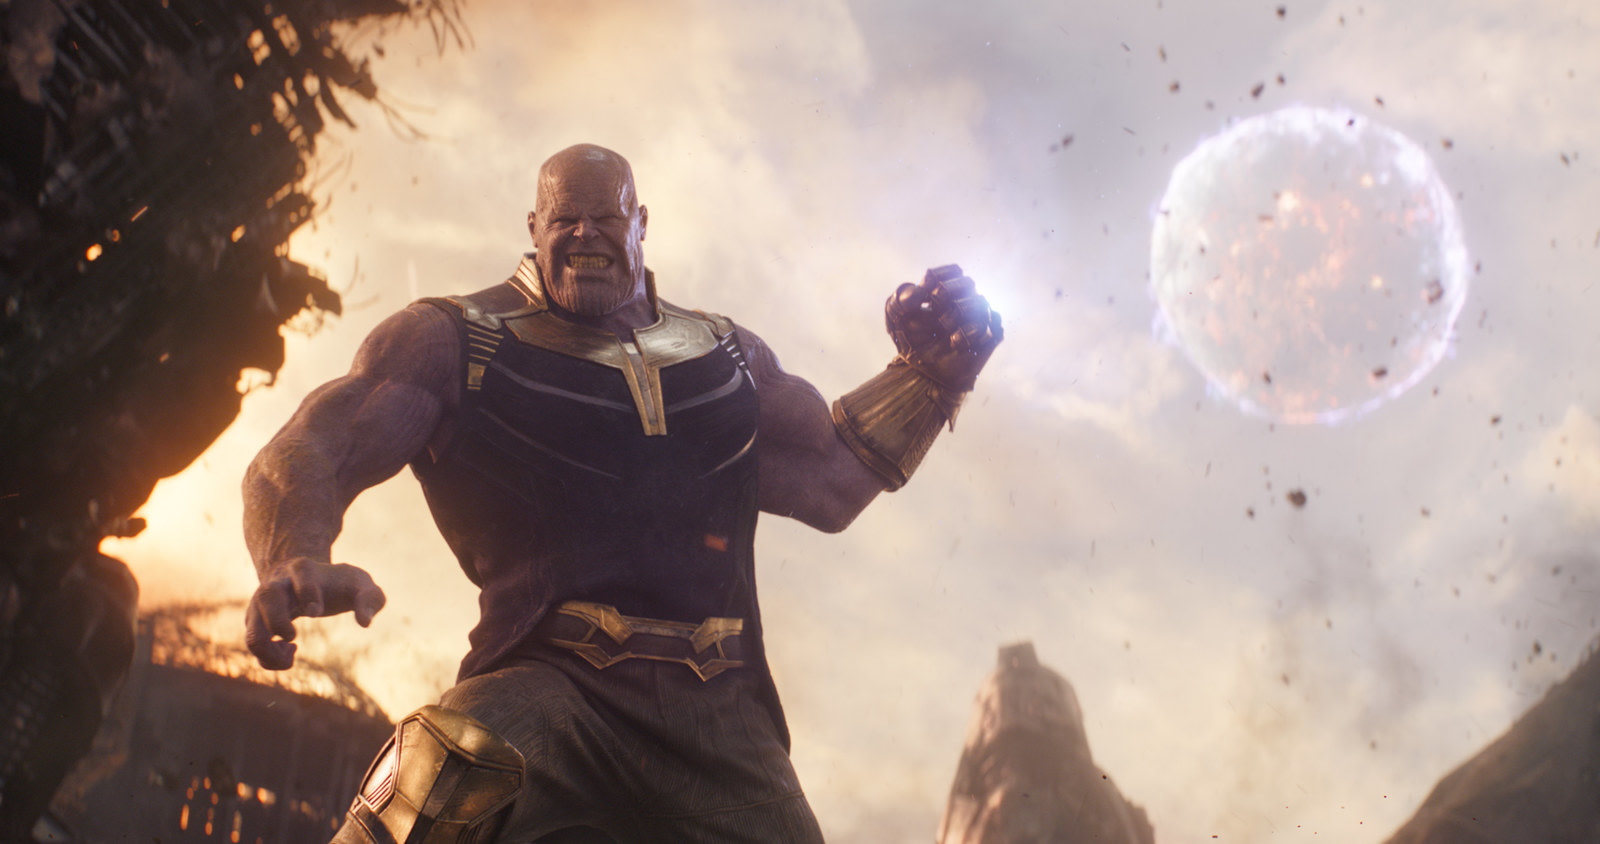 Avengers: Infinity War just crushed all box office records, opening with an estimated $630 million worldwide.